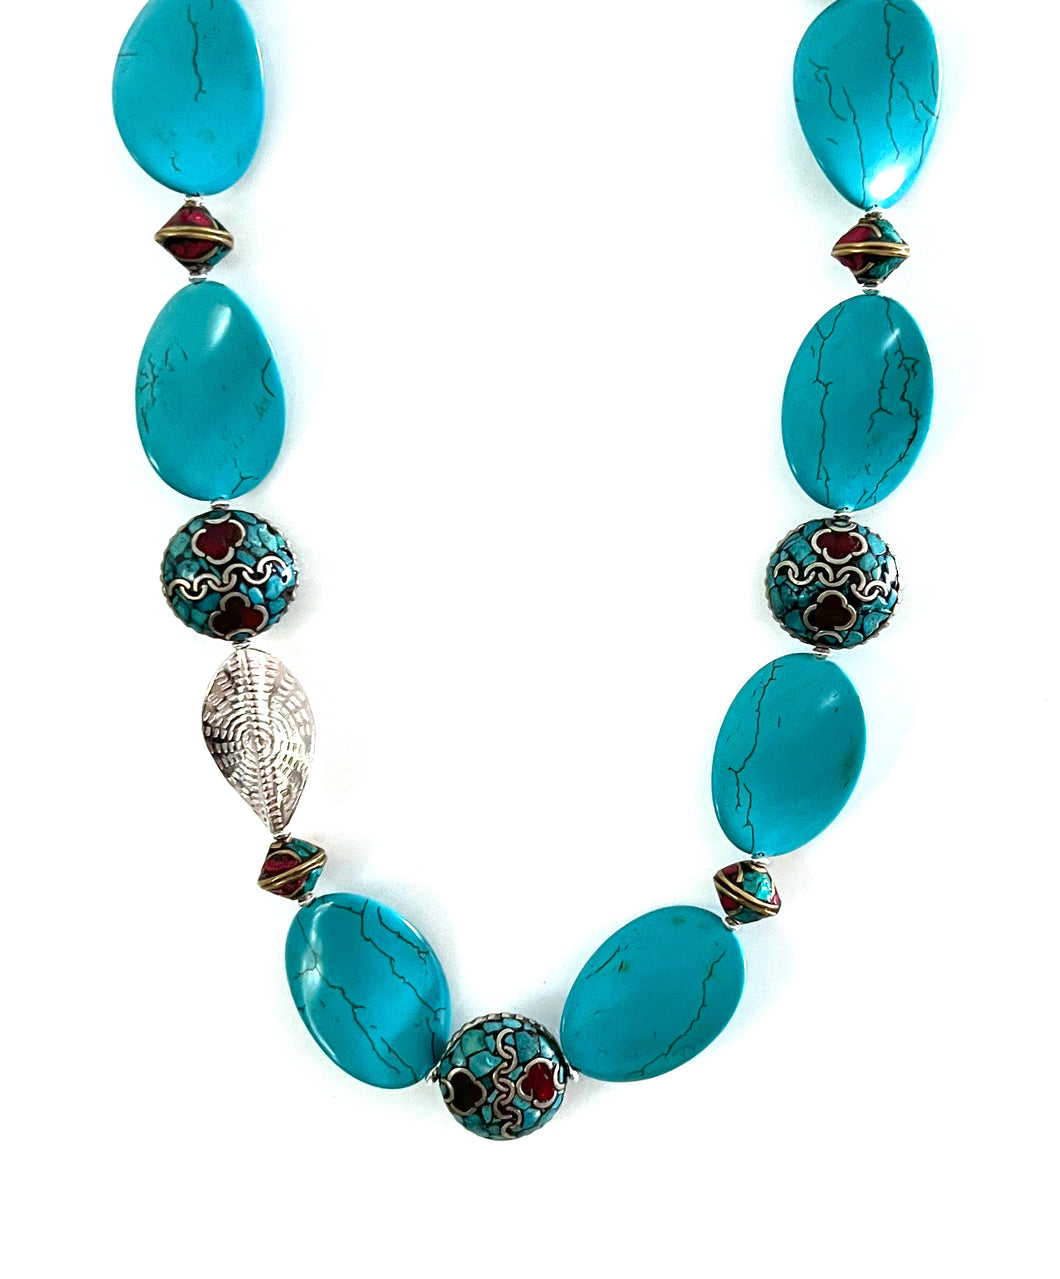 Australian Handmade Turquoise Colour Necklace with Howlite Nepalese Beads and Sterling Silver